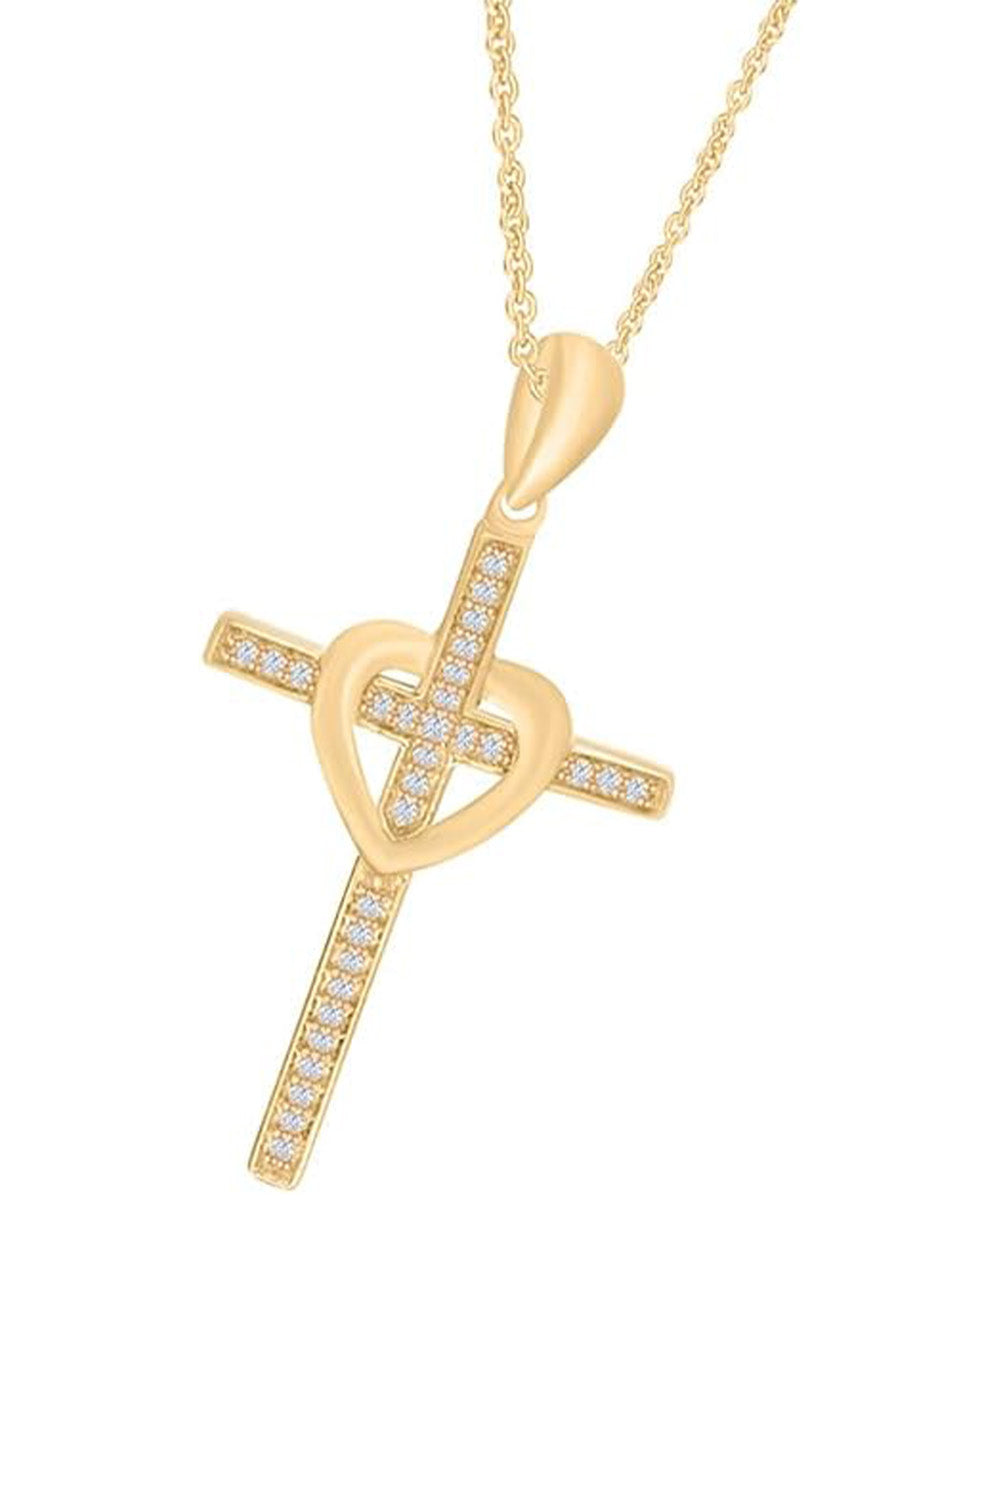 Yellow Gold Color Heart Cross Pendant Necklace, Cross Necklace Religious